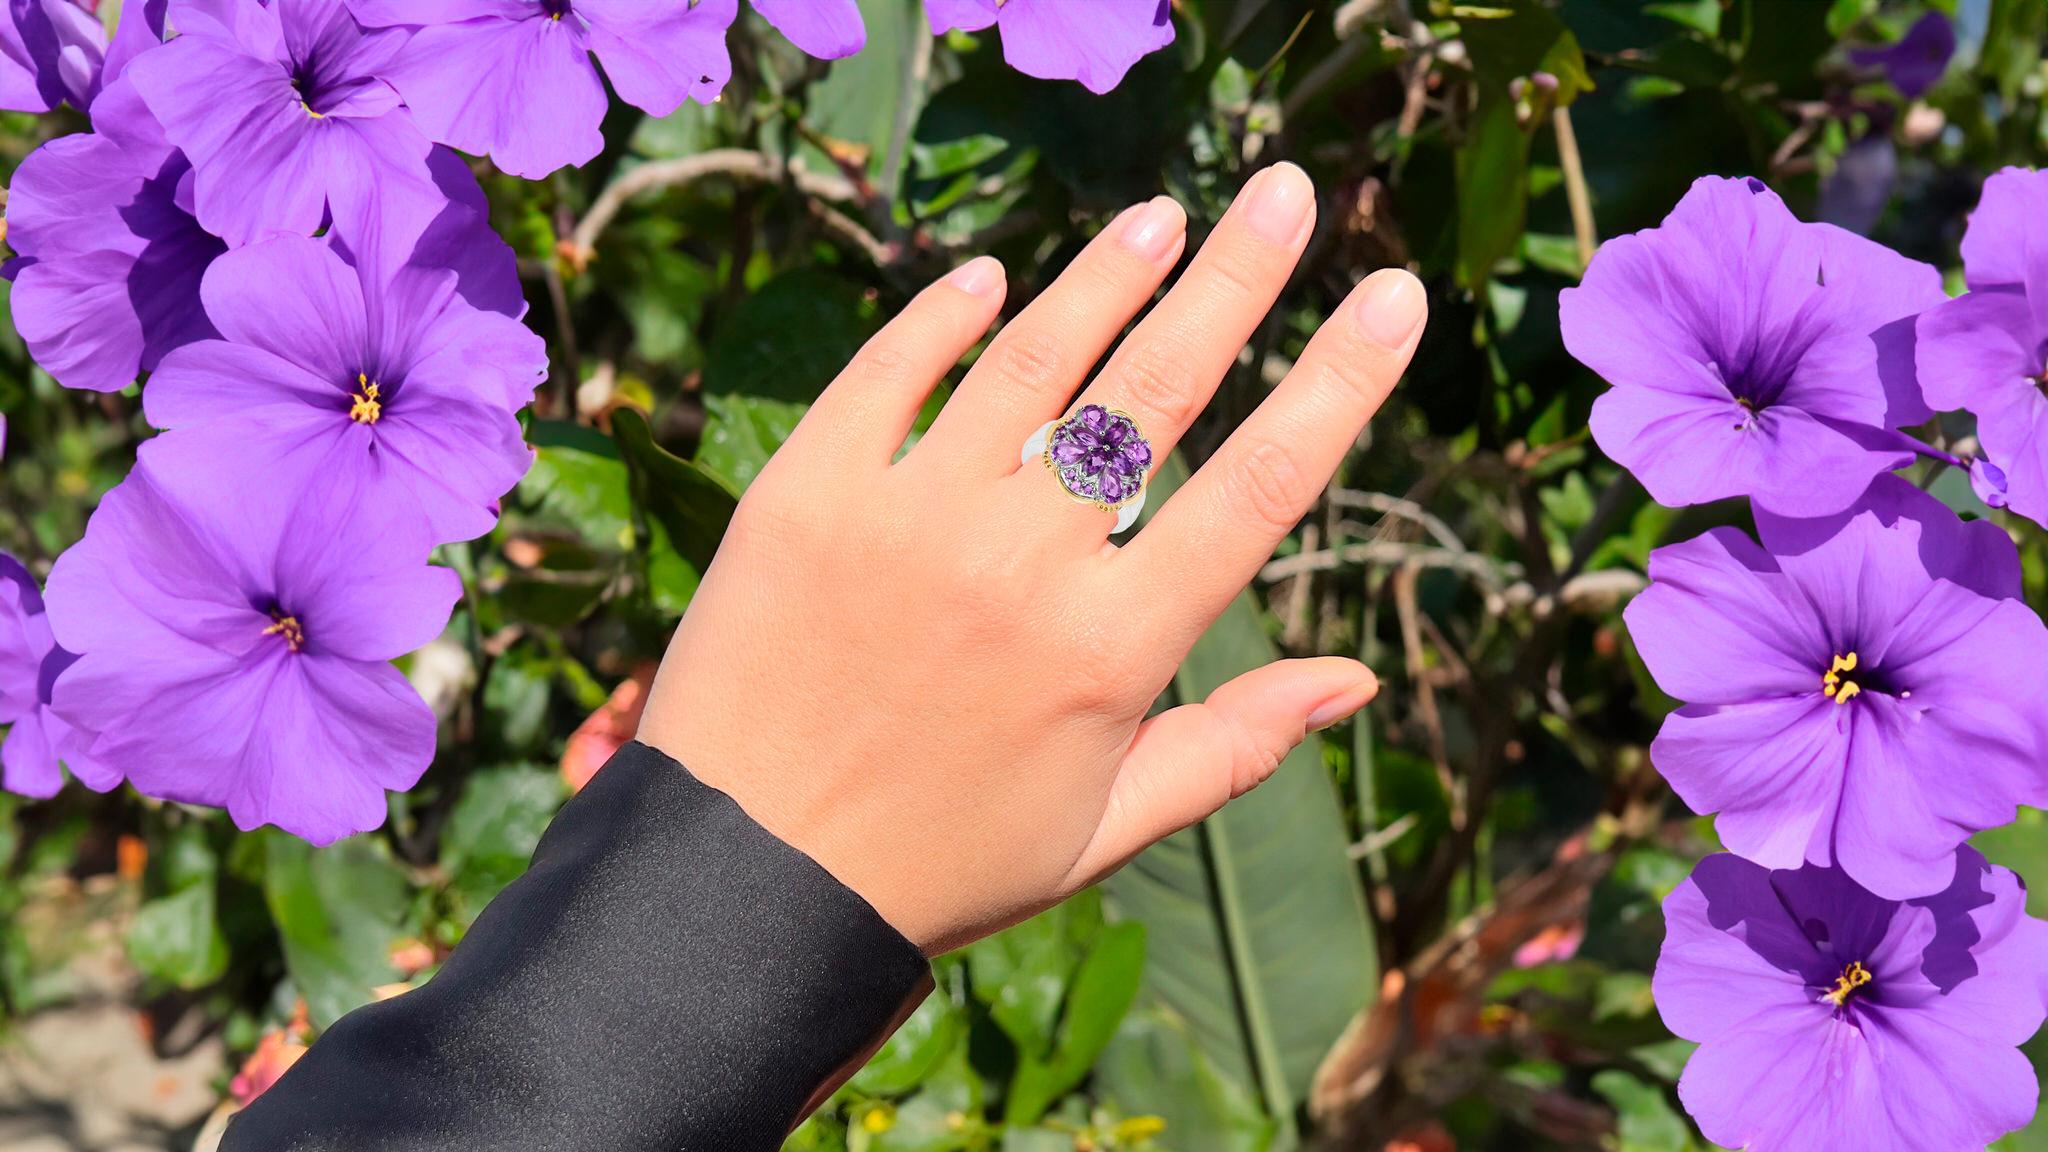 It comes with the appraisal by GIA GG/AJP
Amethyst = 2.60 Carats
Metal: Sterling Silver
14K Yellow Gold Plated
Height: 12.5 mm
Width: 9 mm
Length: 10.5 mm
Ring Size: 8* US
*It can be resized complimentary